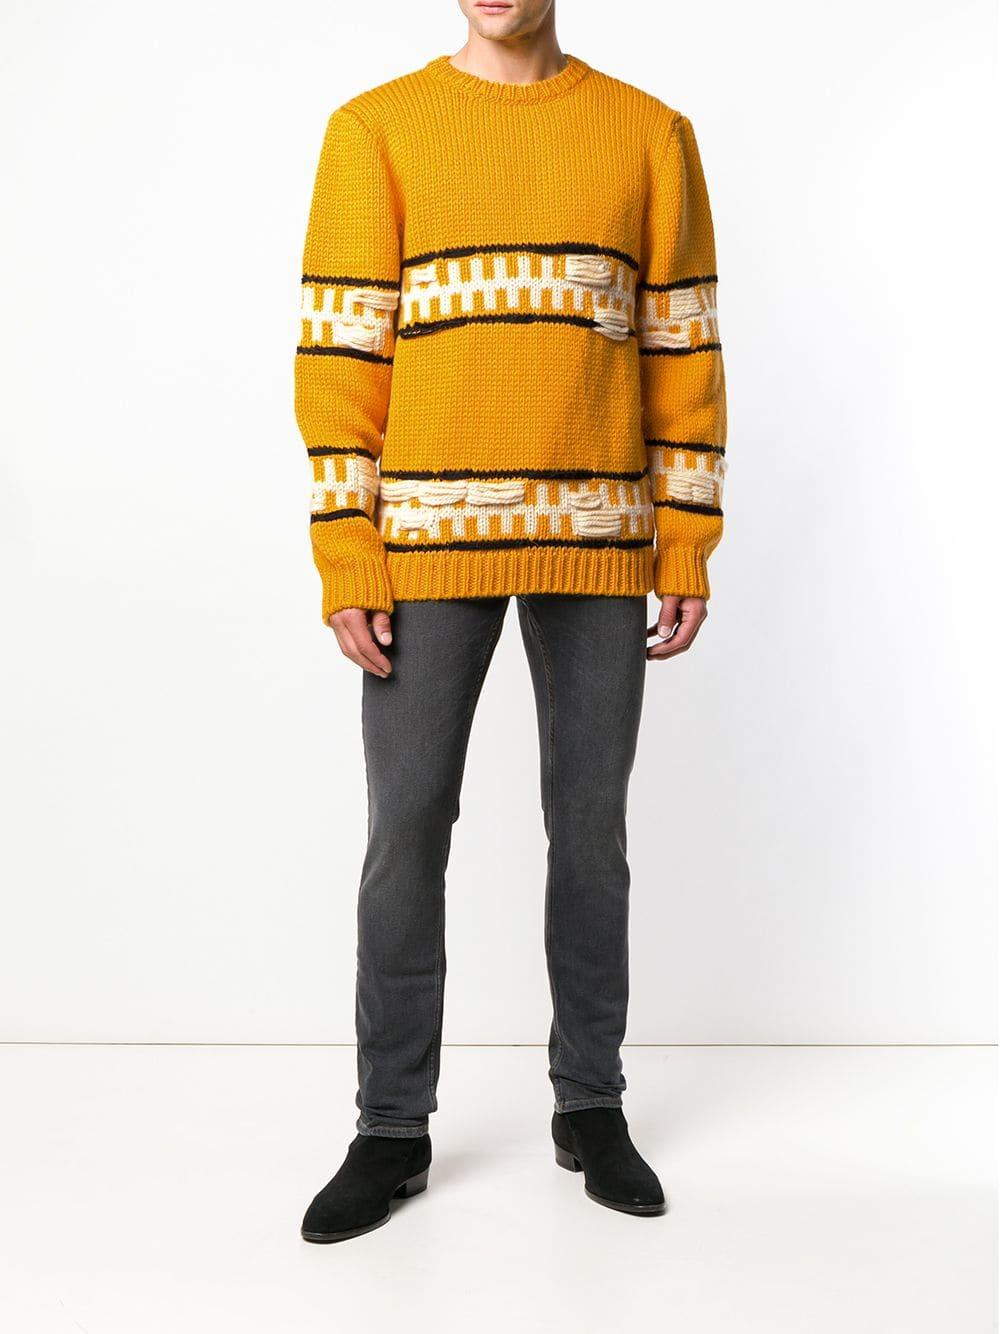 CALVIN KLEIN 205W39NYC Wool Knitted Jumper in Yellow for Men - Lyst